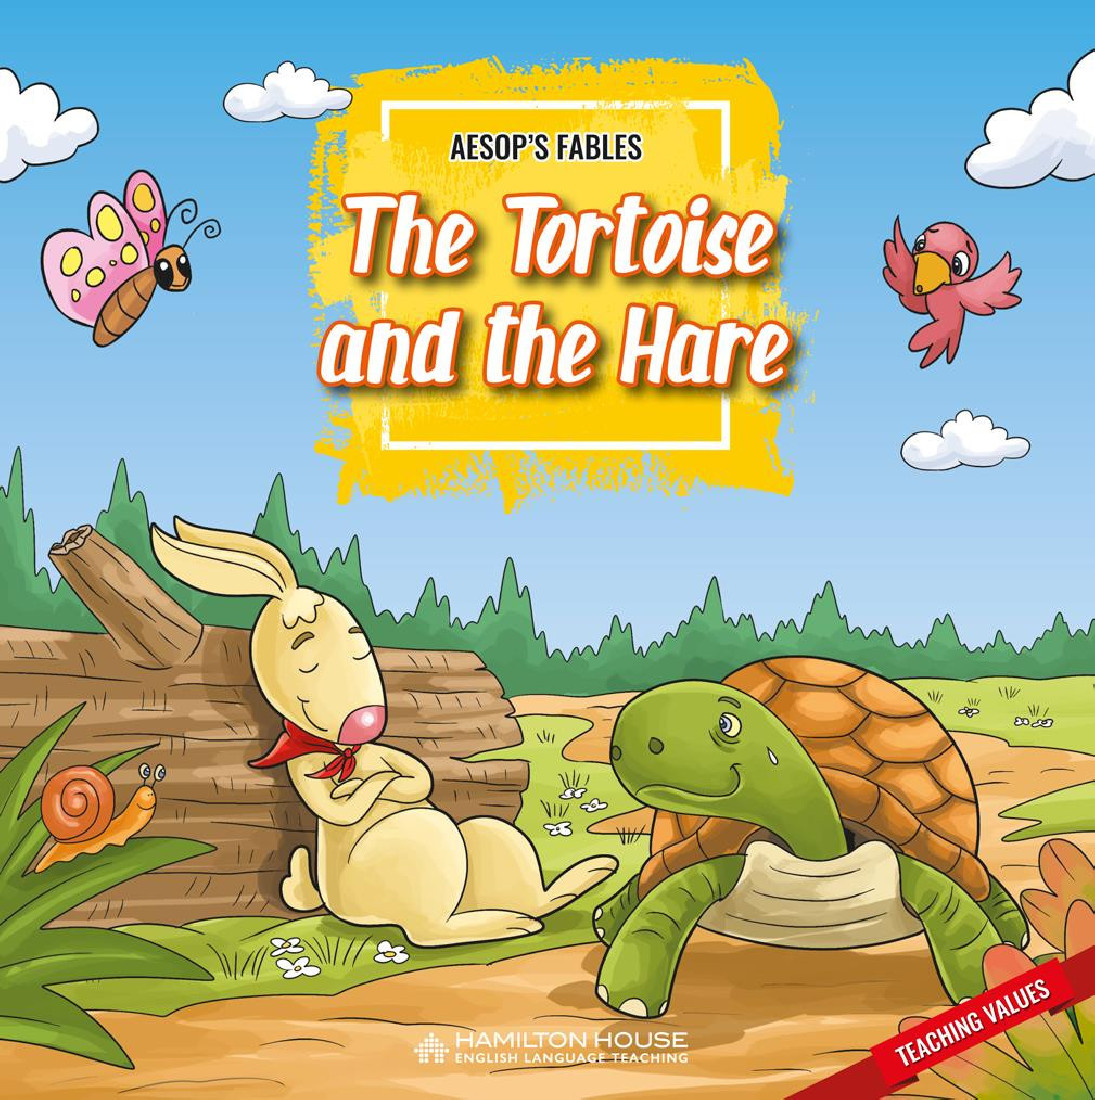 AF : THE TORTOISE AND THE HARE